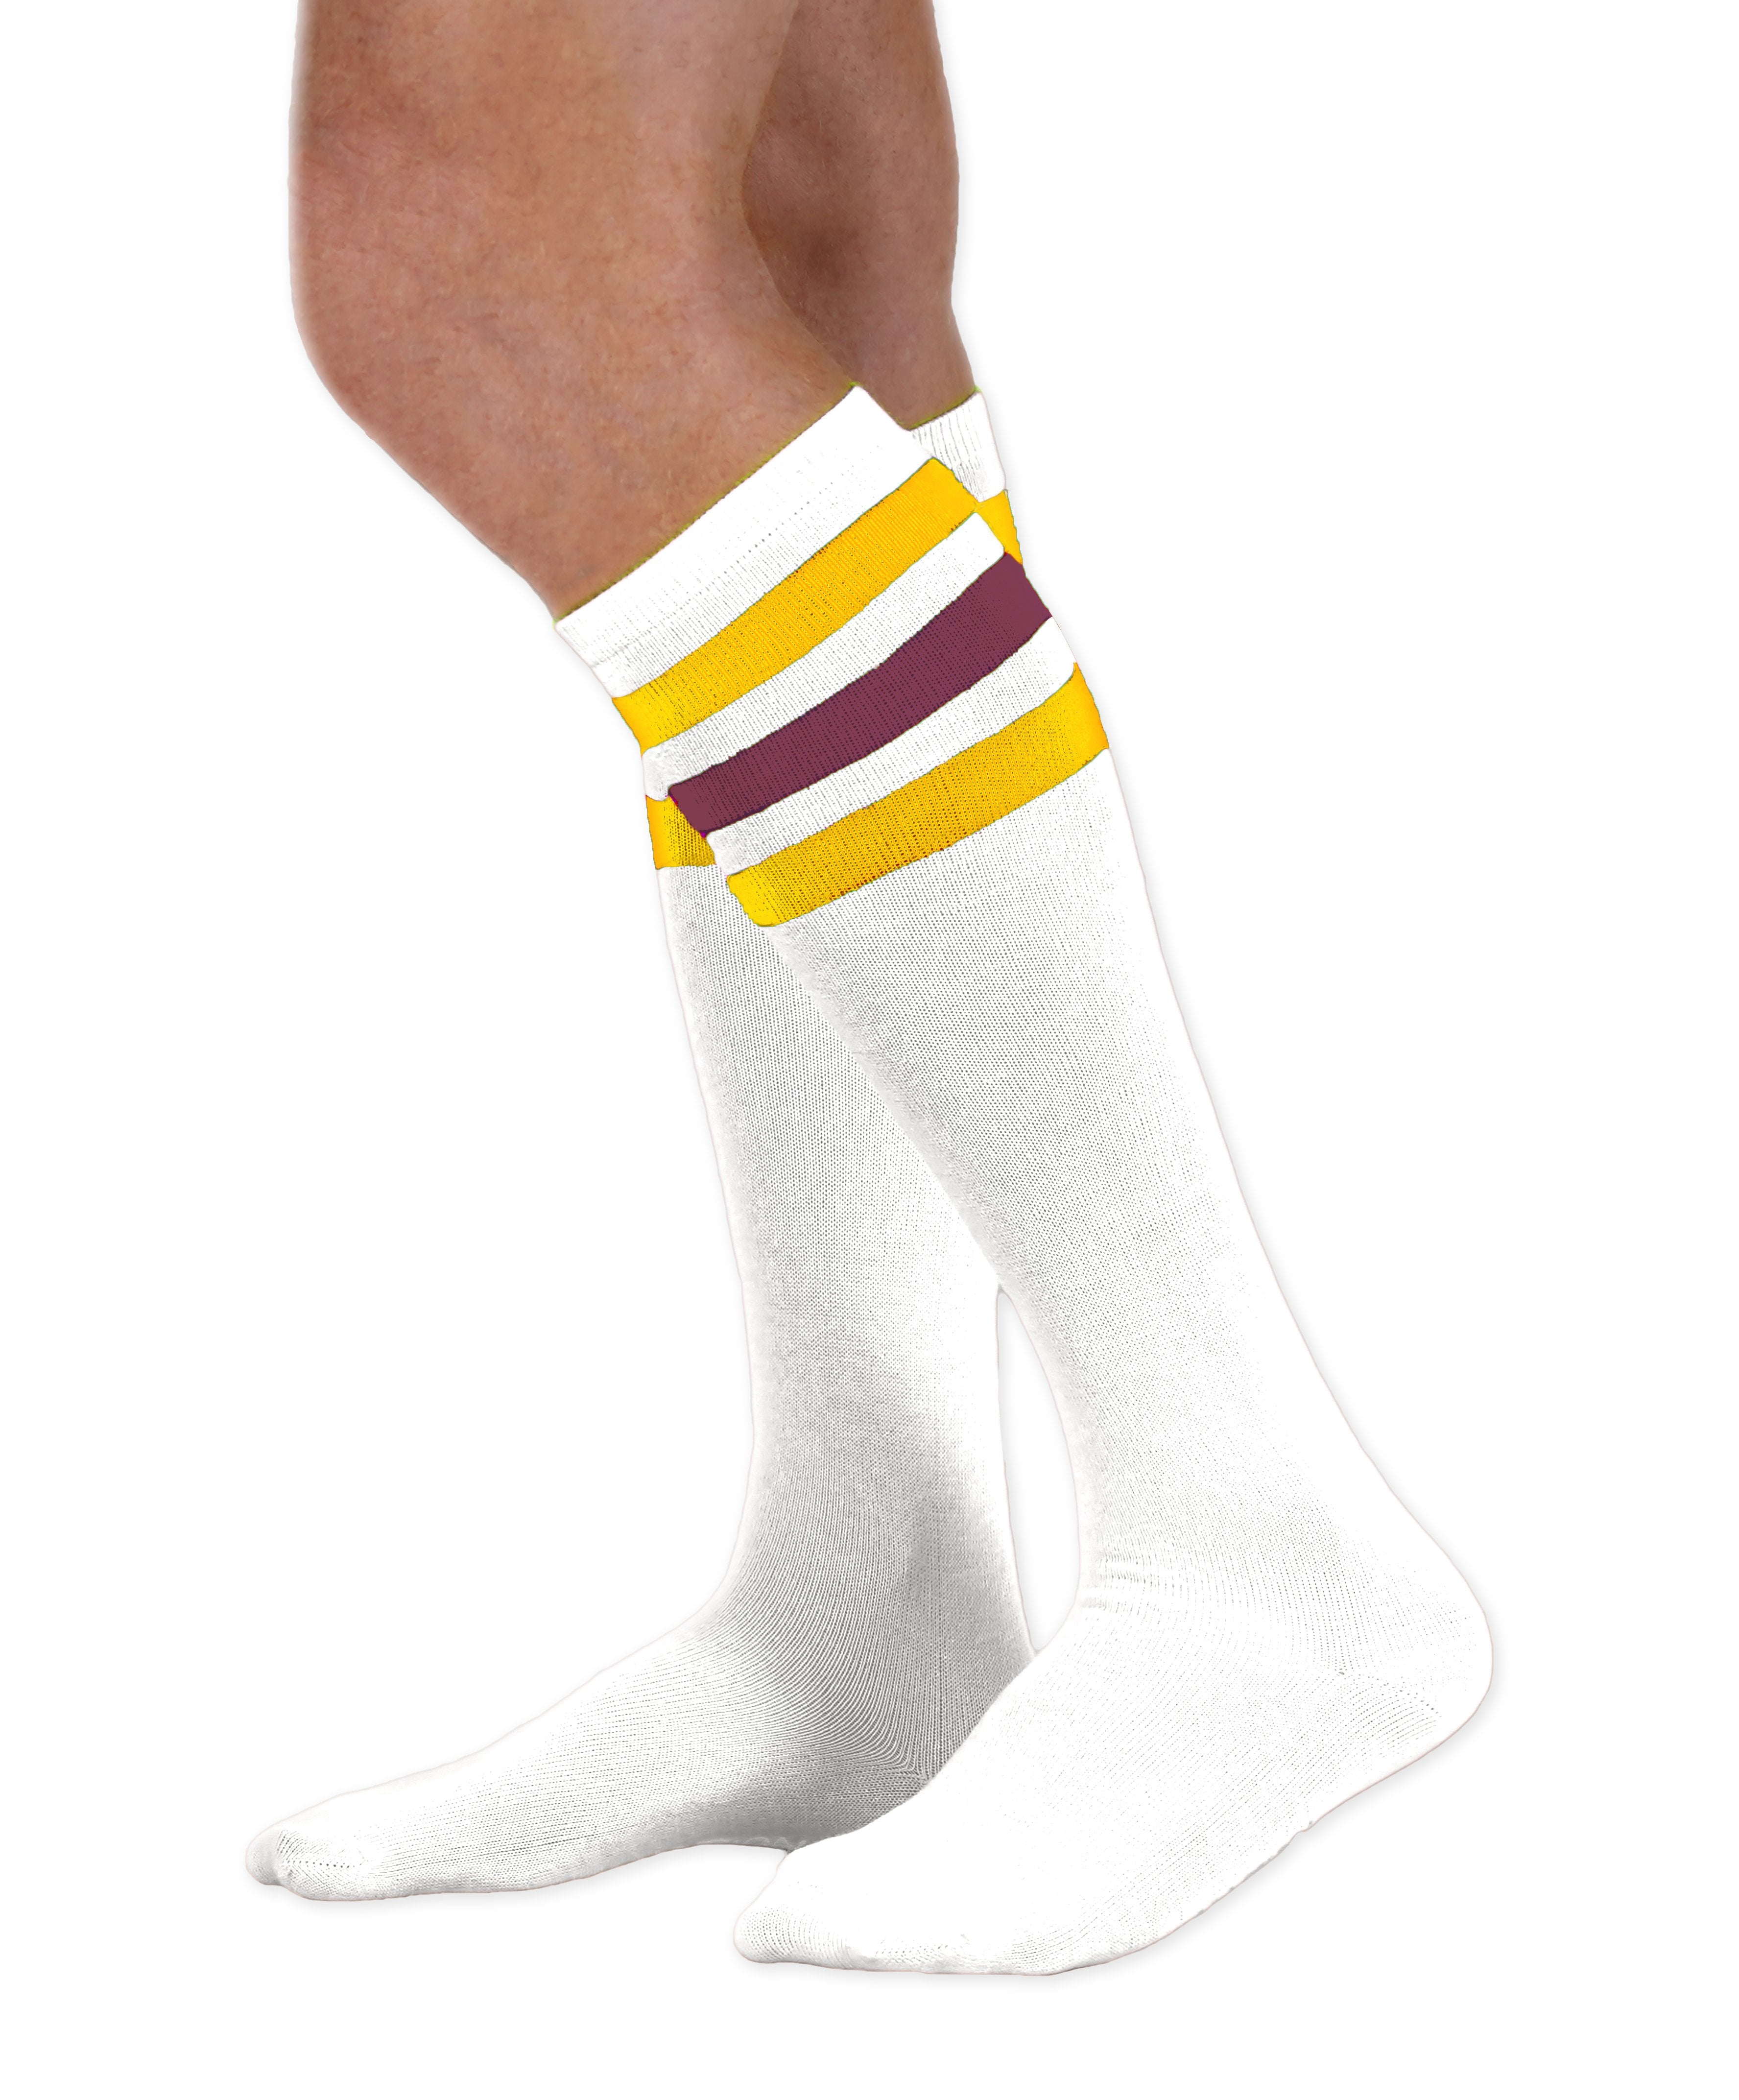 Unisex adult size white knee high tube sock with three gold and burgundy stripes